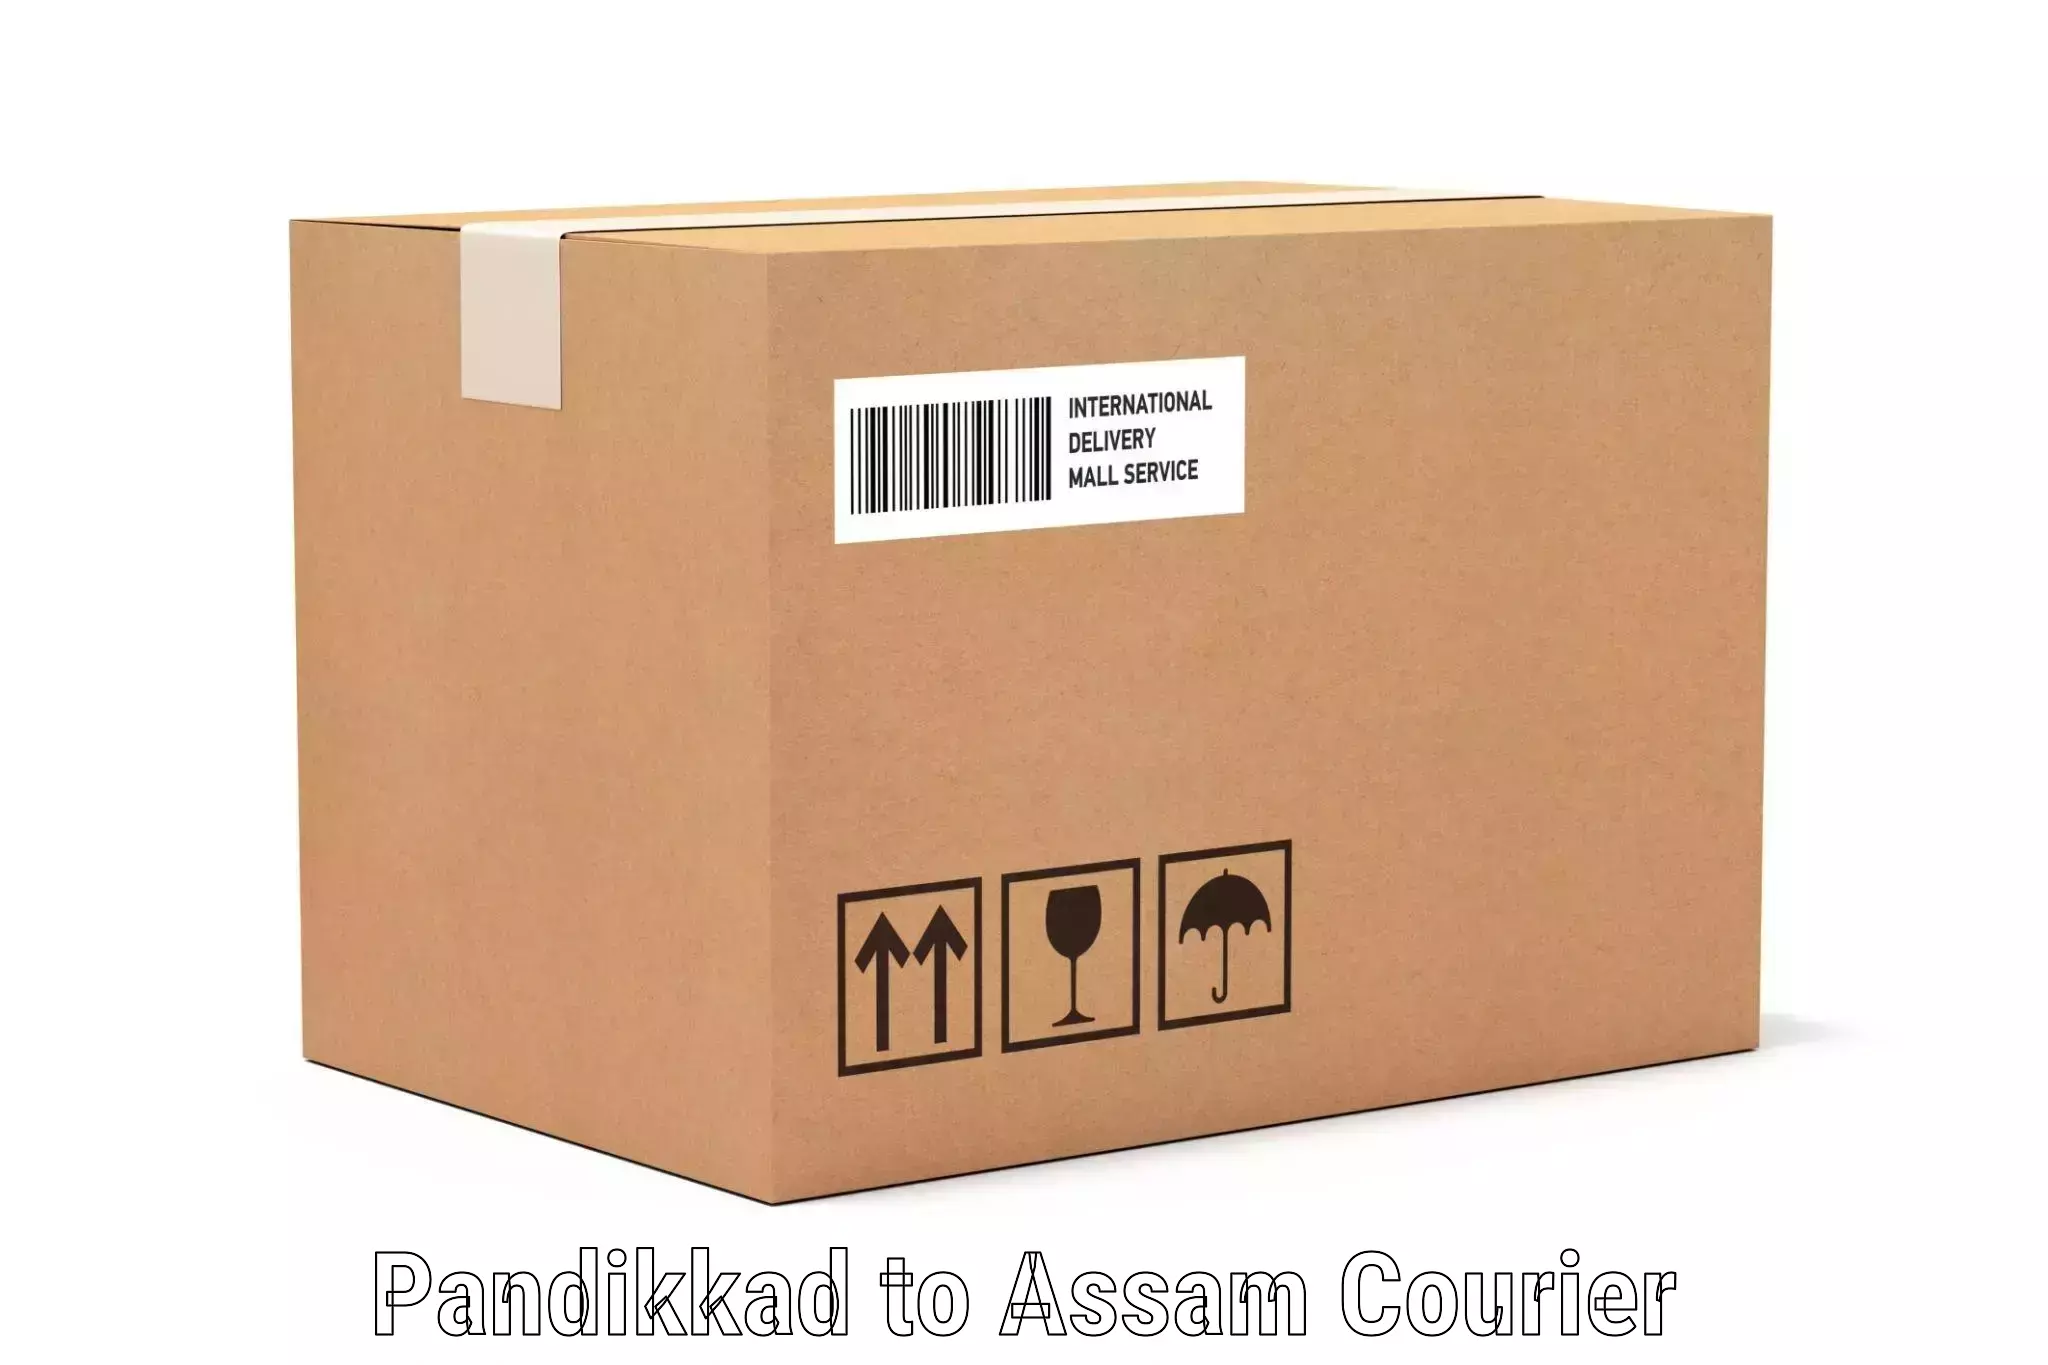 Baggage delivery planning Pandikkad to Assam